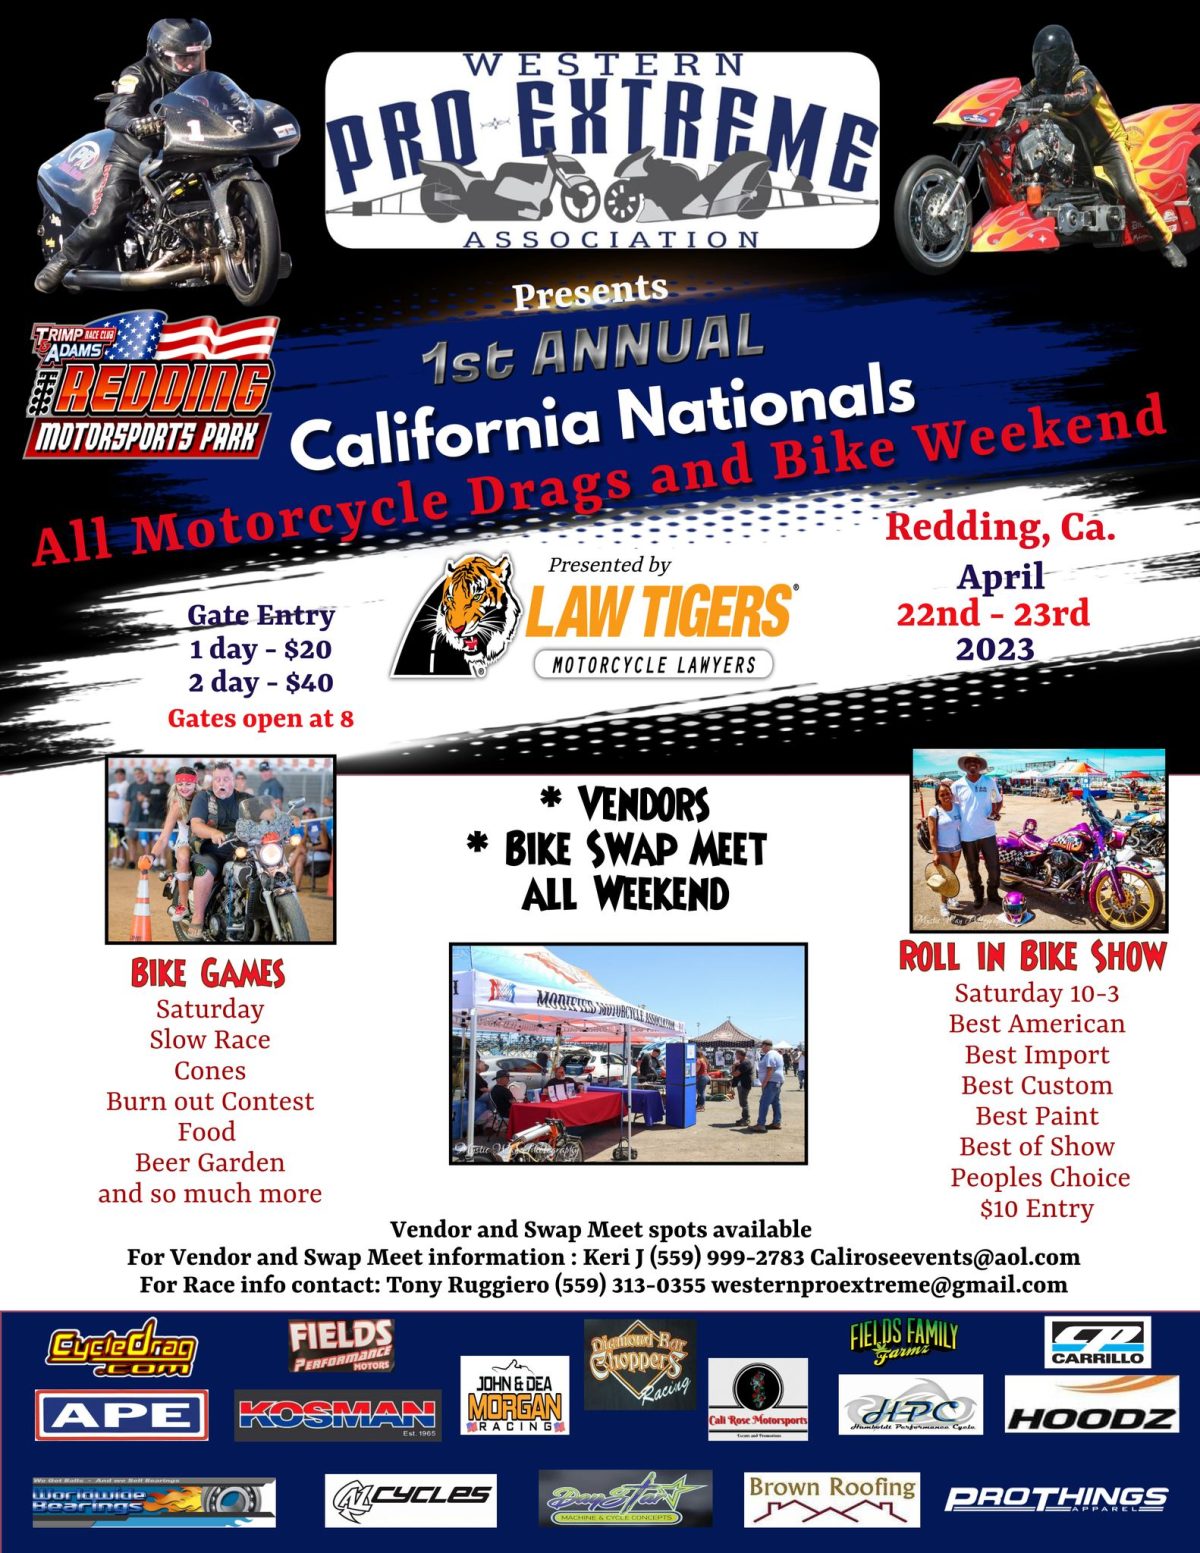 California Nationals All Bike Drags